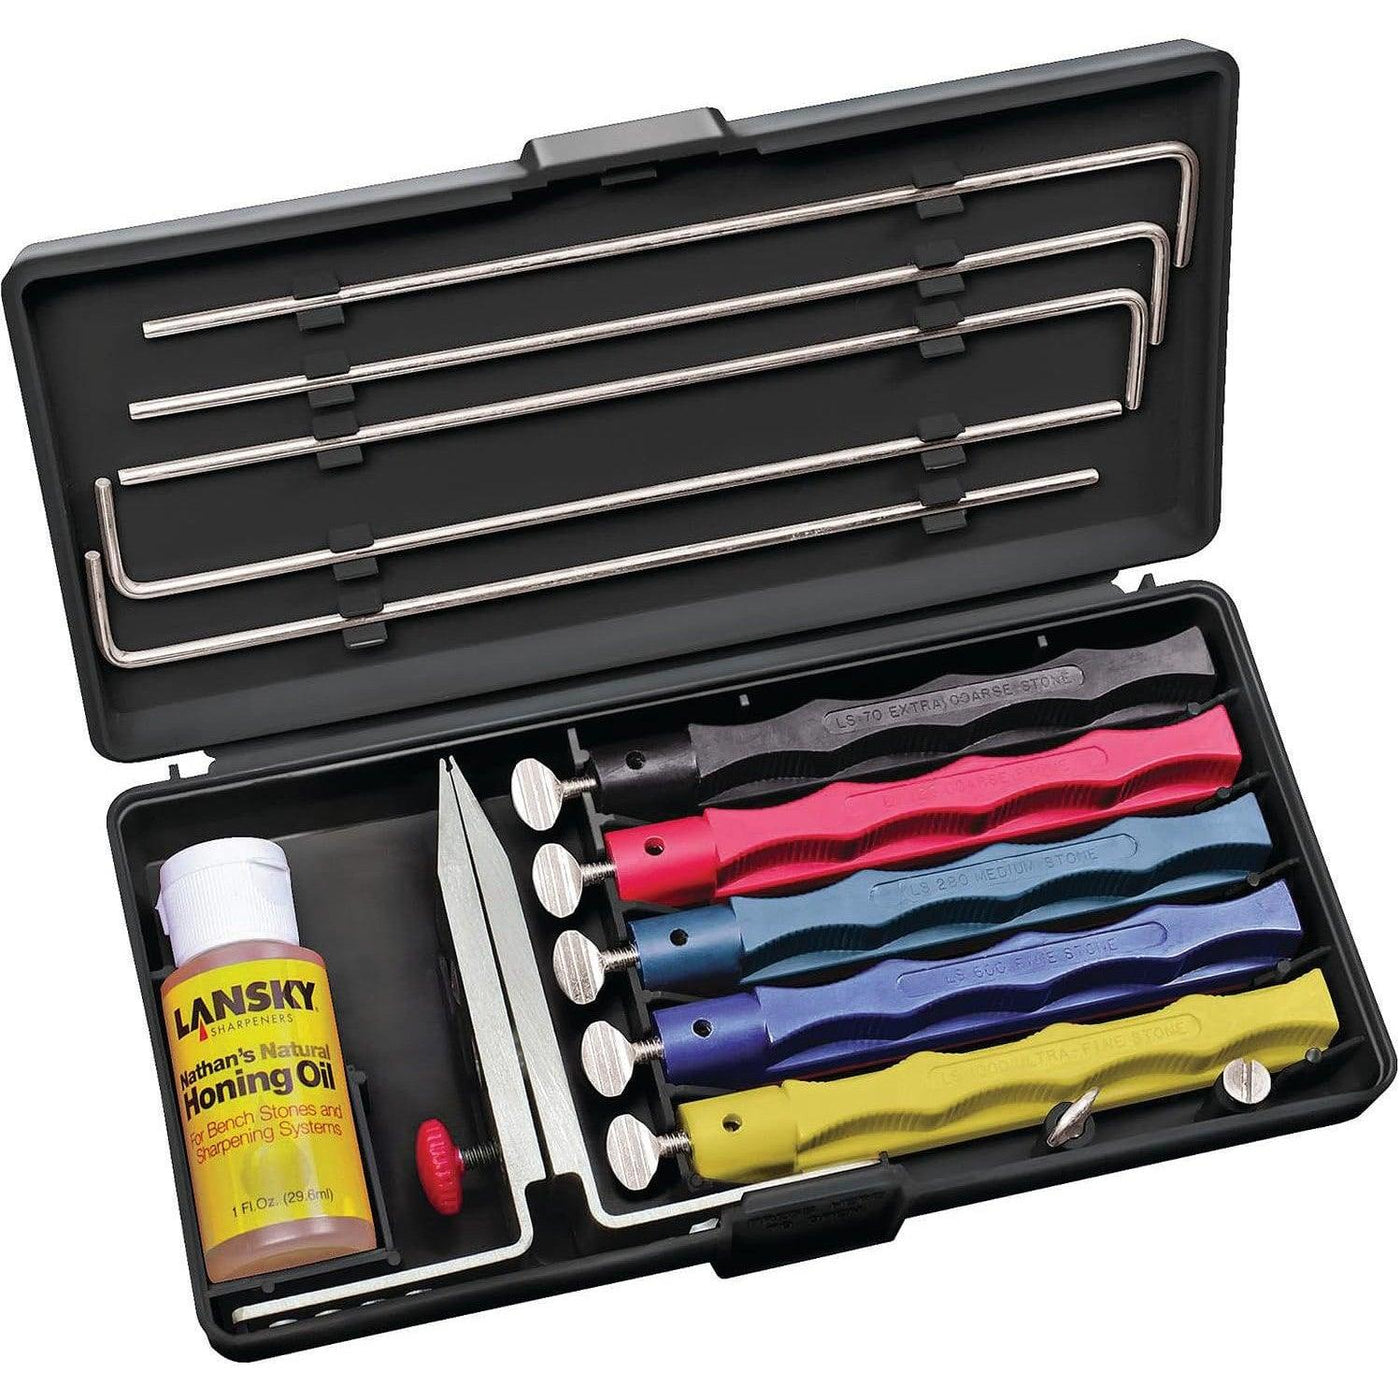 Lansky Deluxe Knife Sharpening System with 5 hones - Massive Discounts